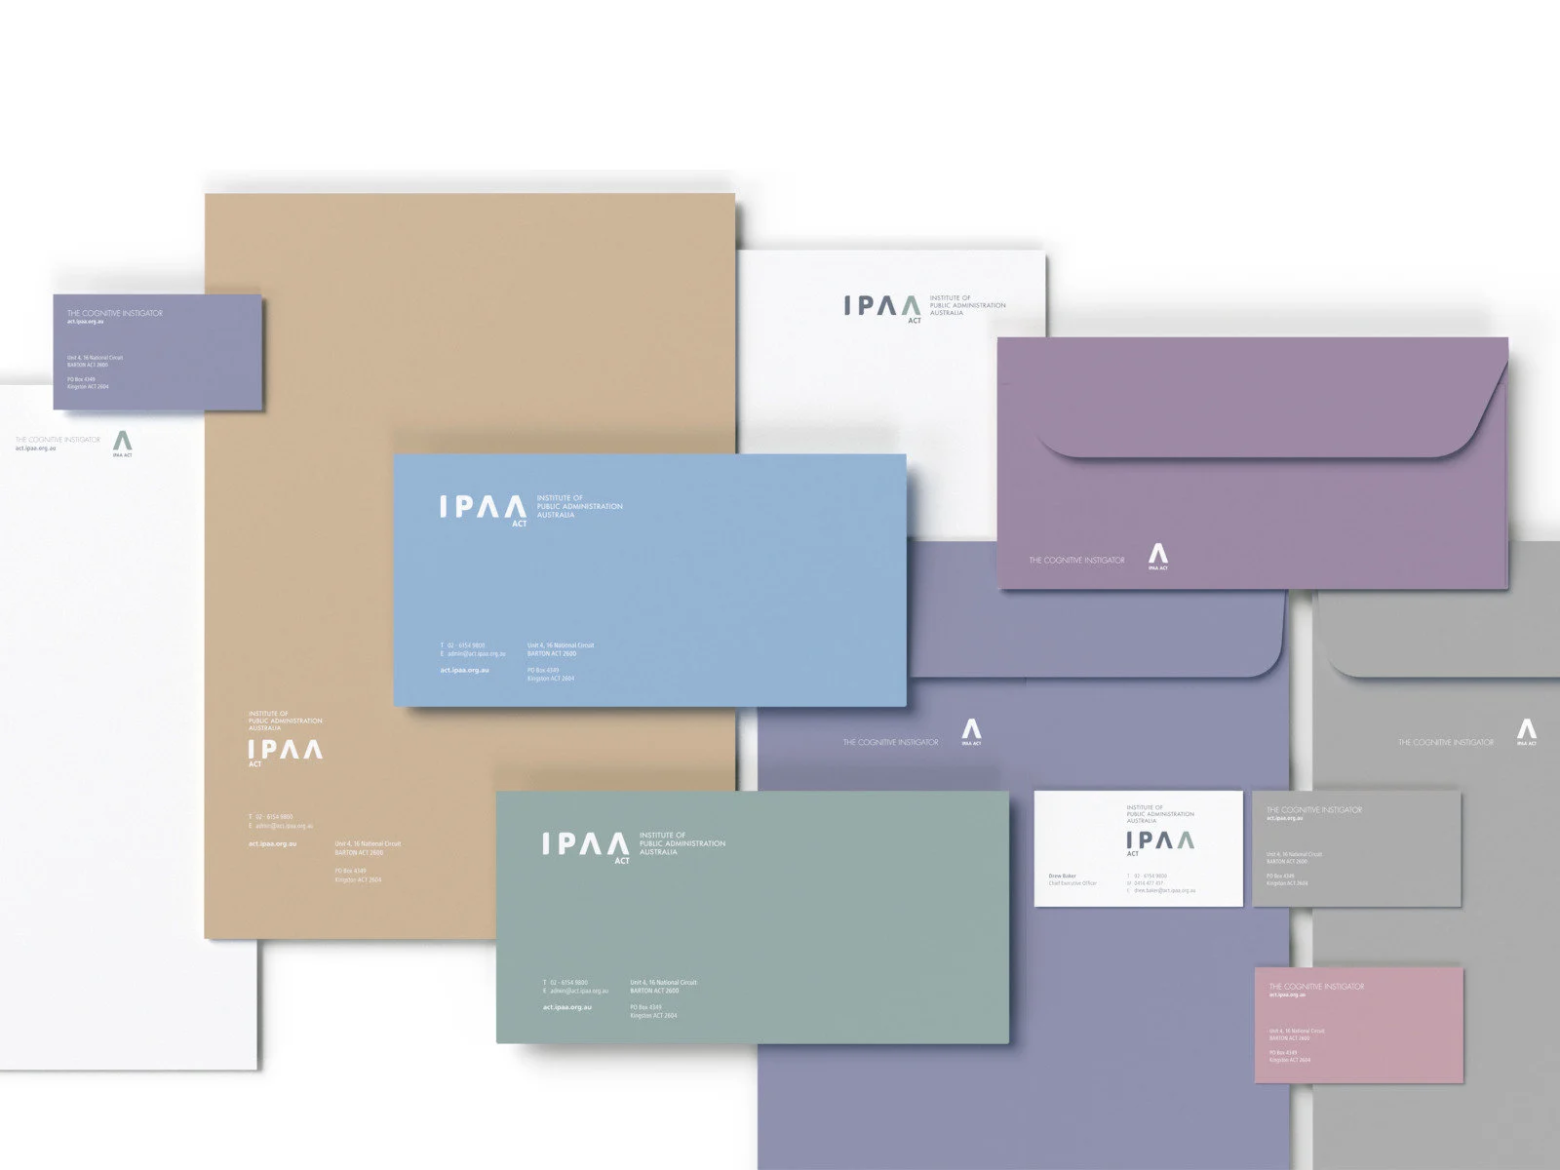 An array of IPAA stationery and business cards in various brand colors, decorated with IPAA logos, sample copy, and letterhead styles.